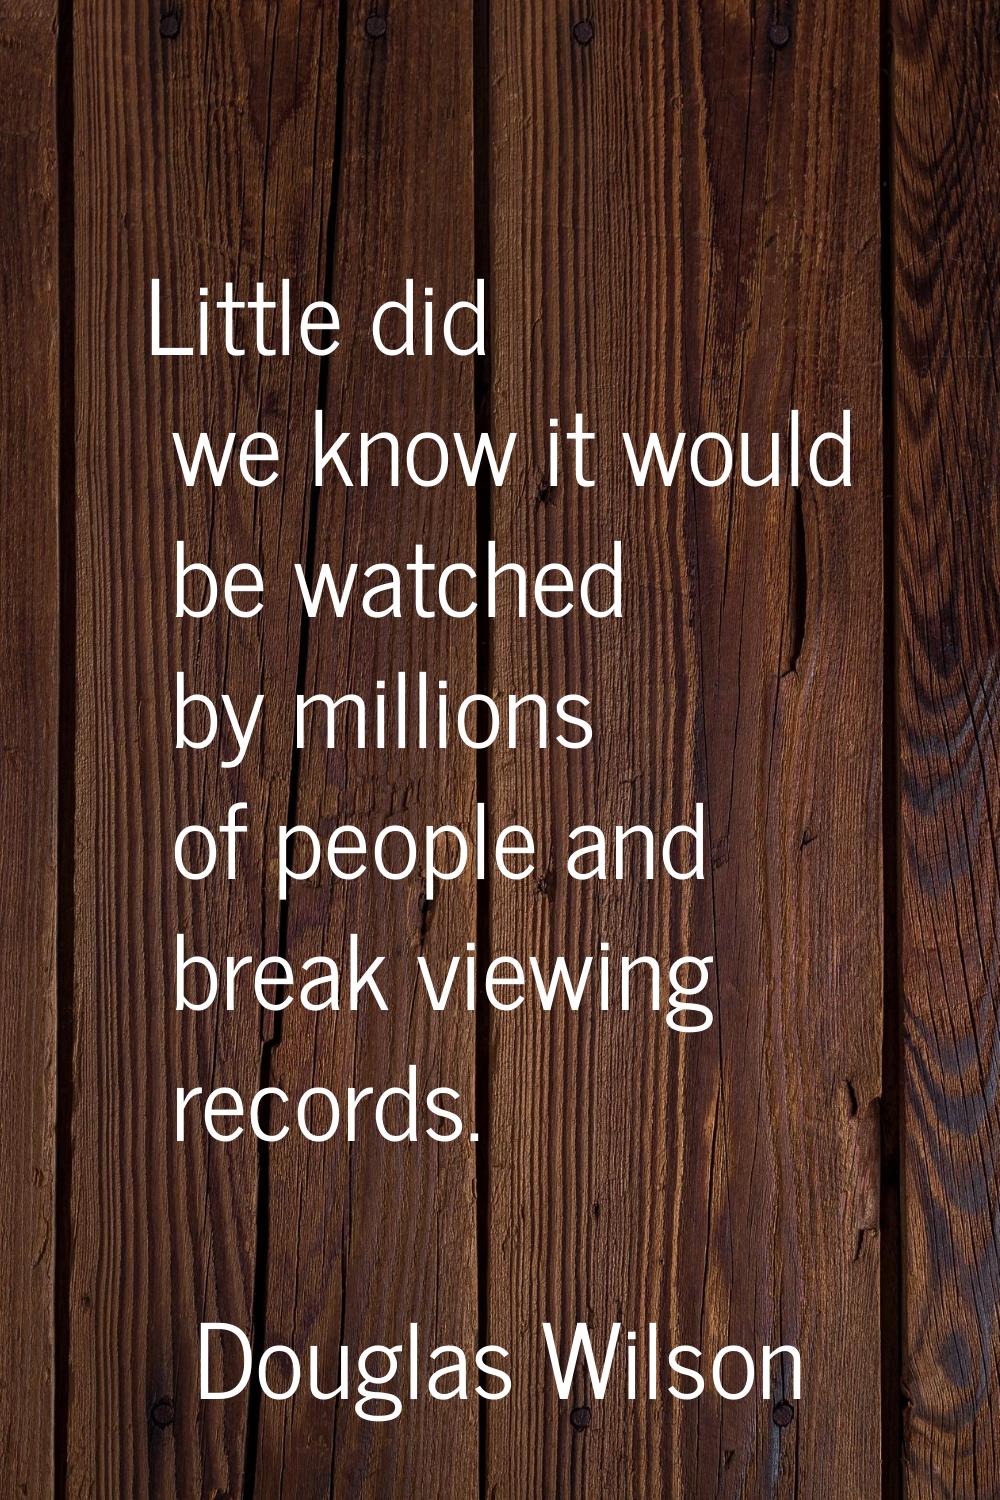 Little did we know it would be watched by millions of people and break viewing records.